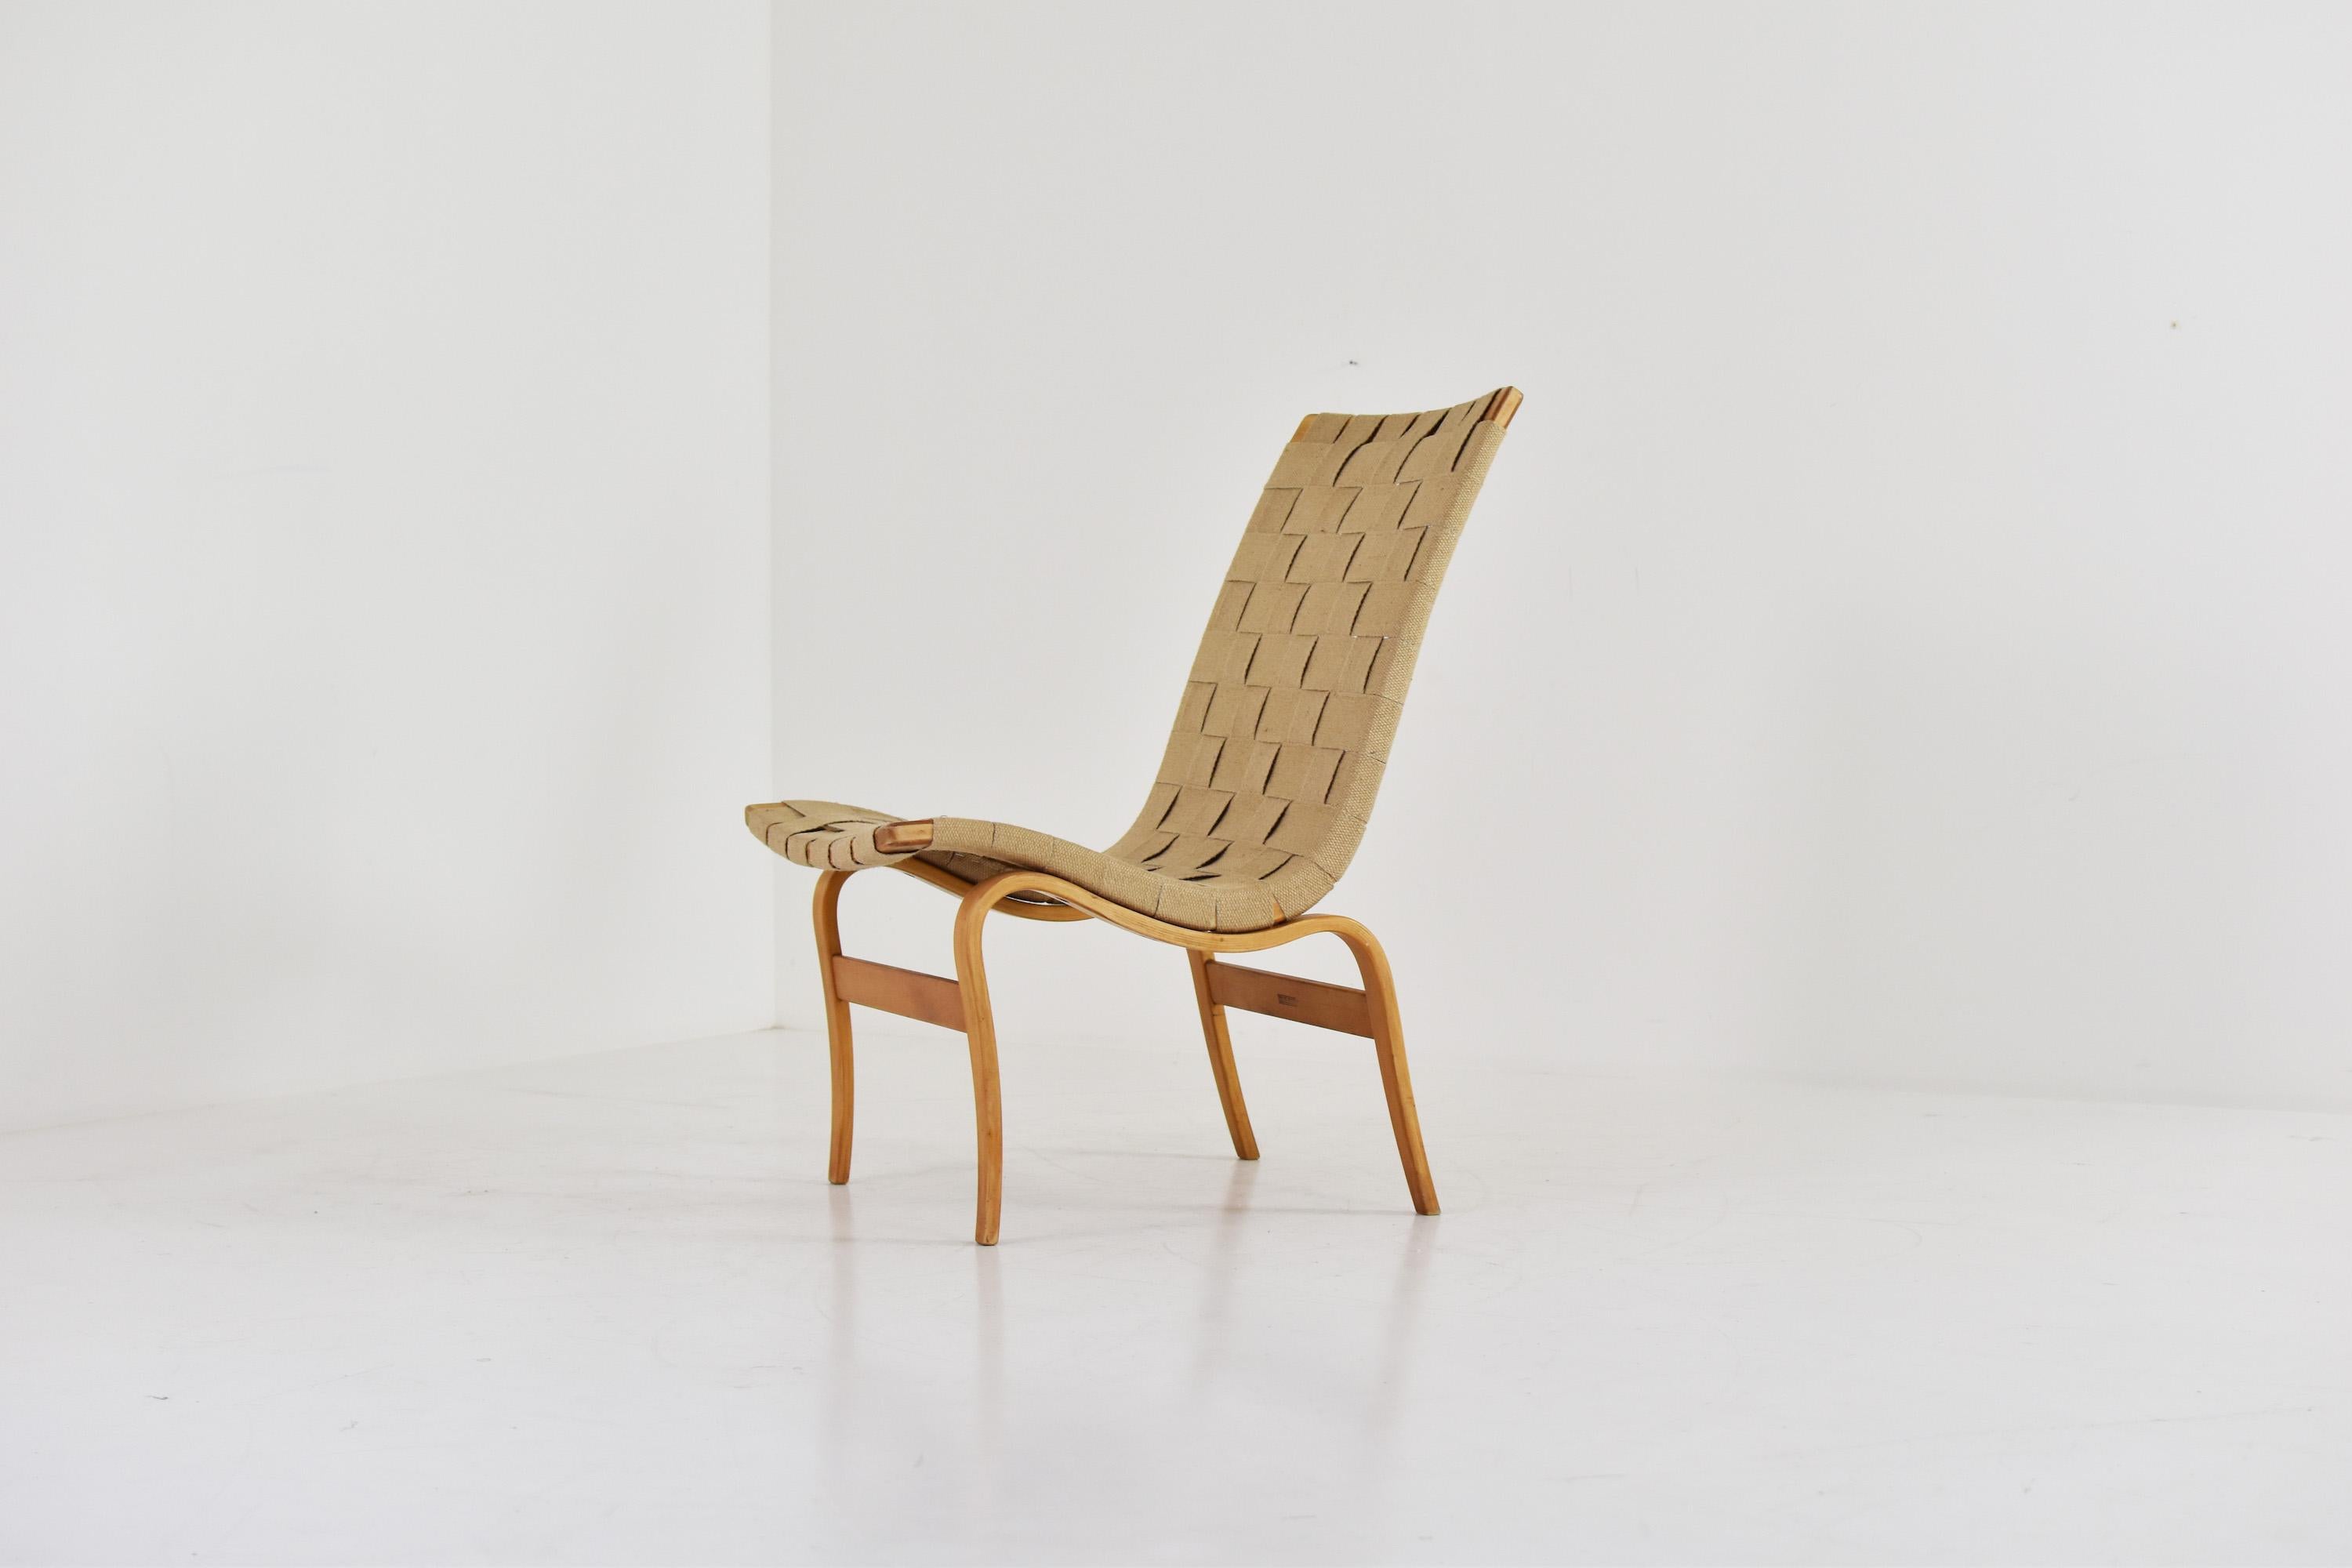 Early edition ‘Eva’ side chair by Bruno Mathsson for Karl Mathsson, Sweden 1960s. This one features a solid birch frame and has the original woven seat and back. Few signs of wear, overall in a very good and original condition. Signed underneath.